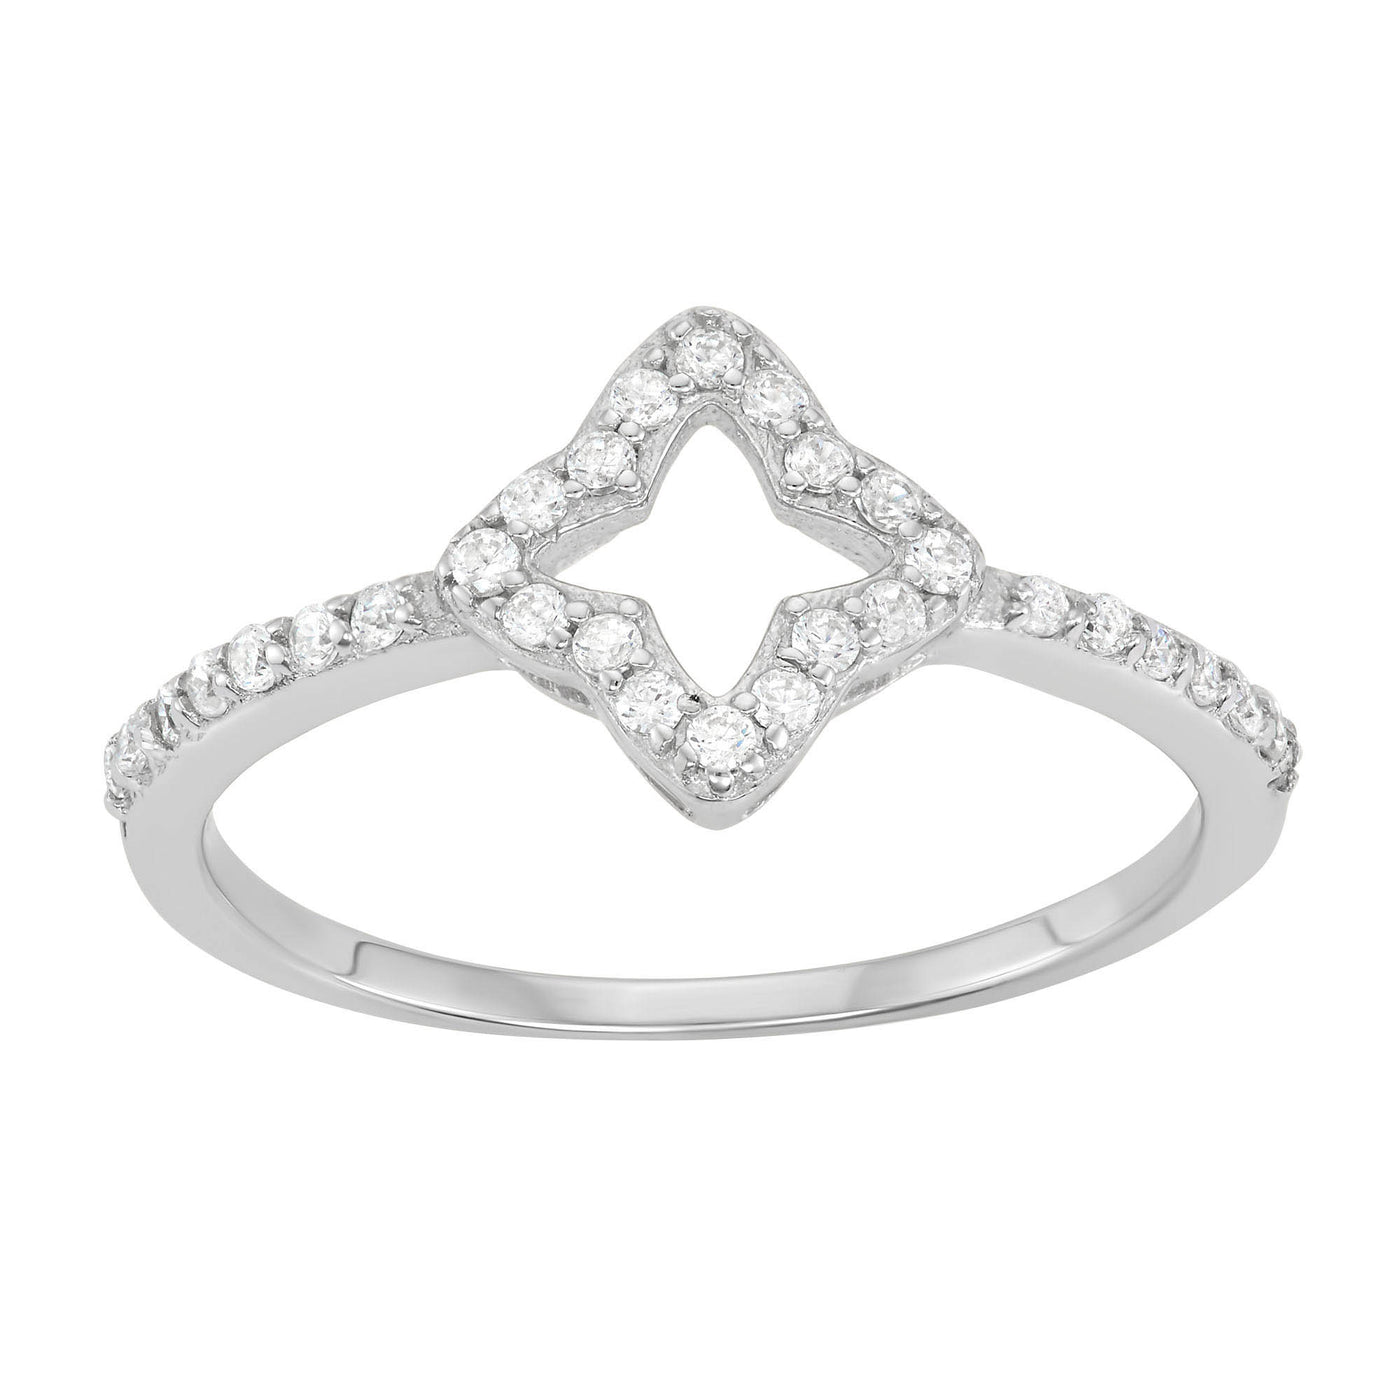 Rebecca Sloane Sterling Silver Star Ring With CZ Stones